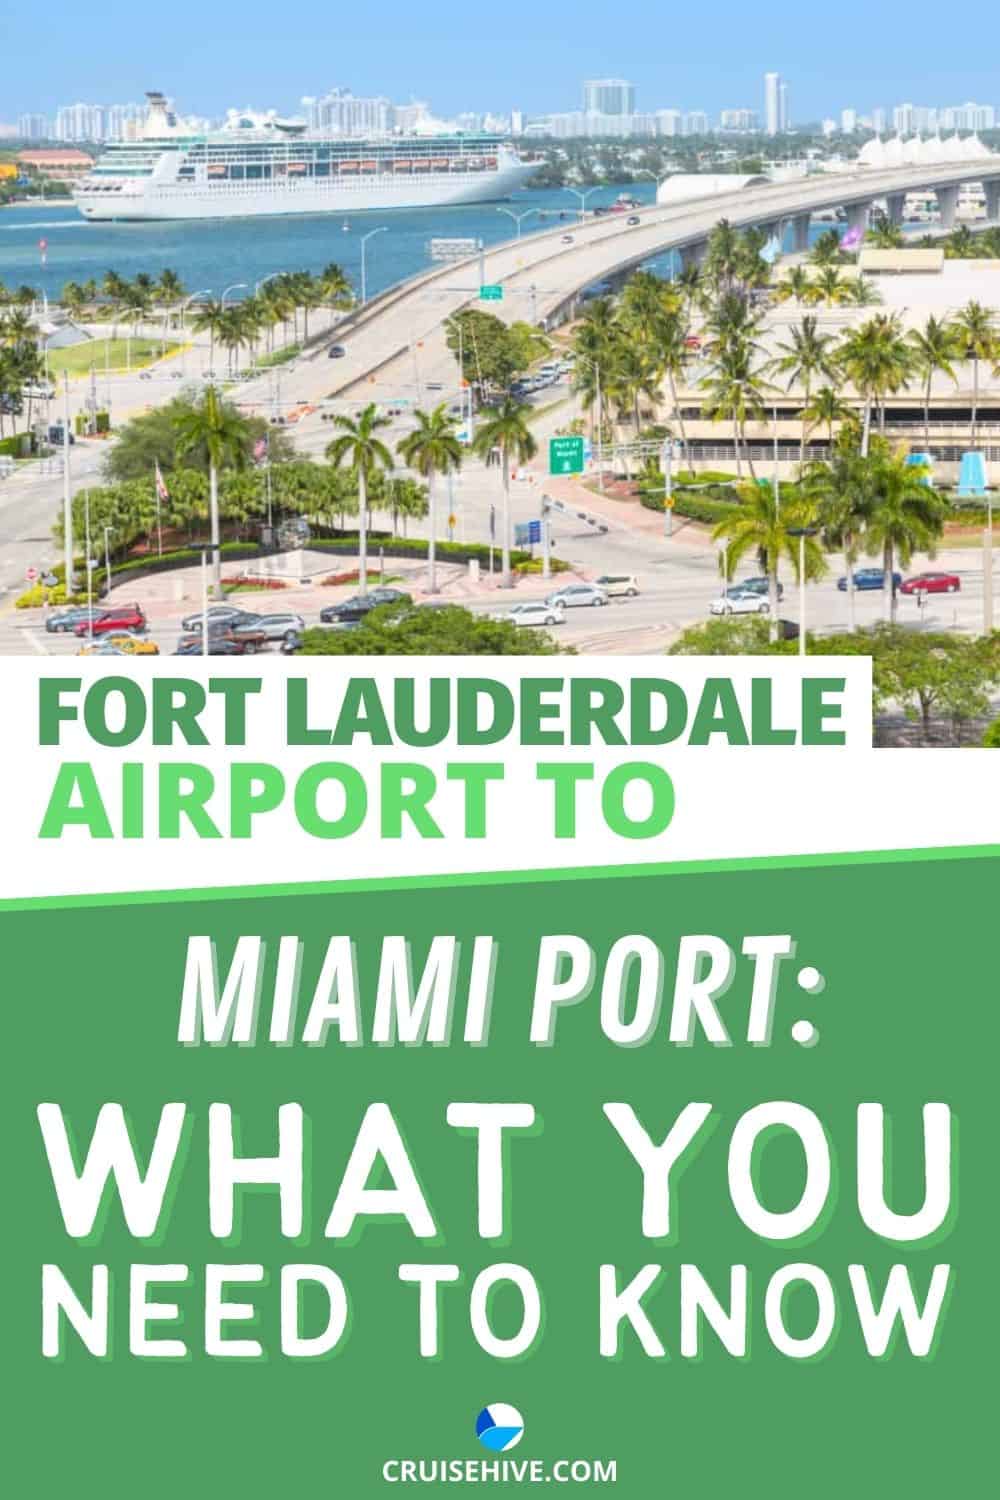 Fort Lauderdale Airport to Miami Port